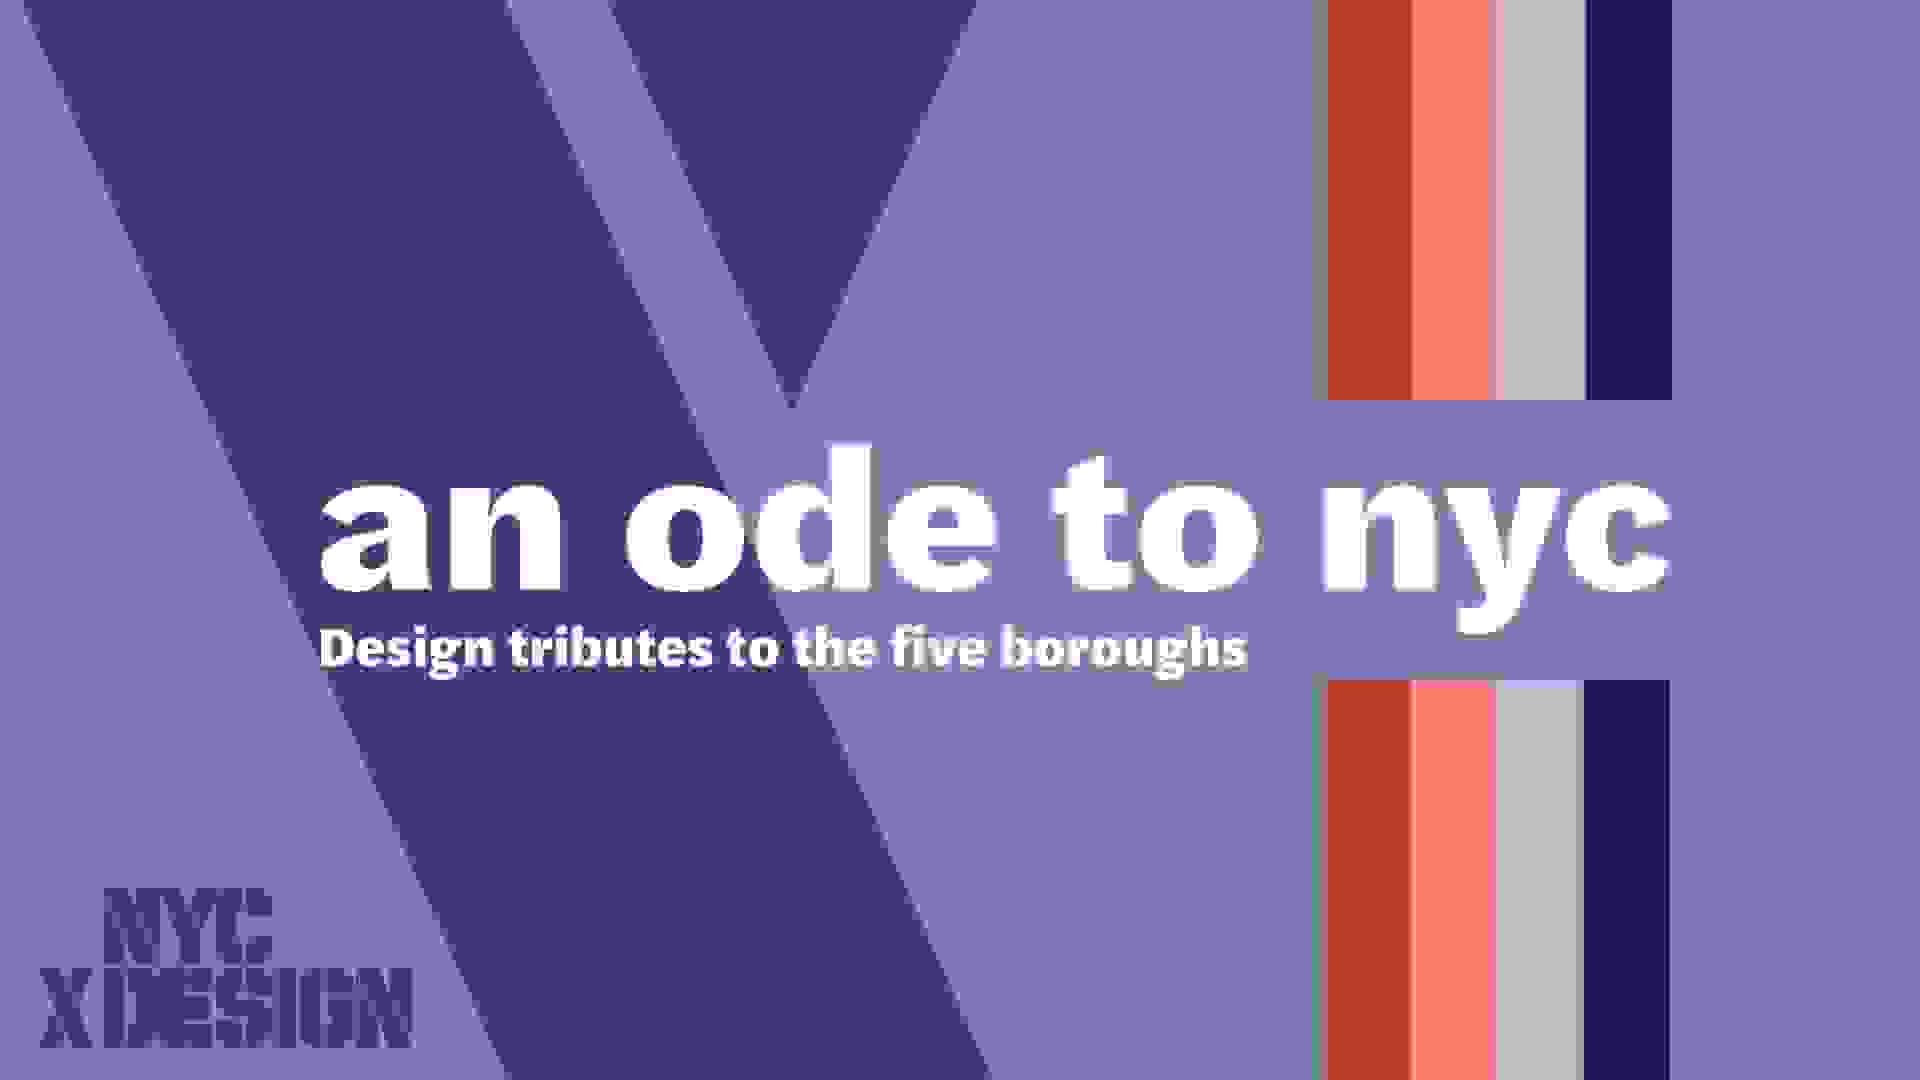 A logo for NYCxDesign's "Ode to NYC" poster campaign.